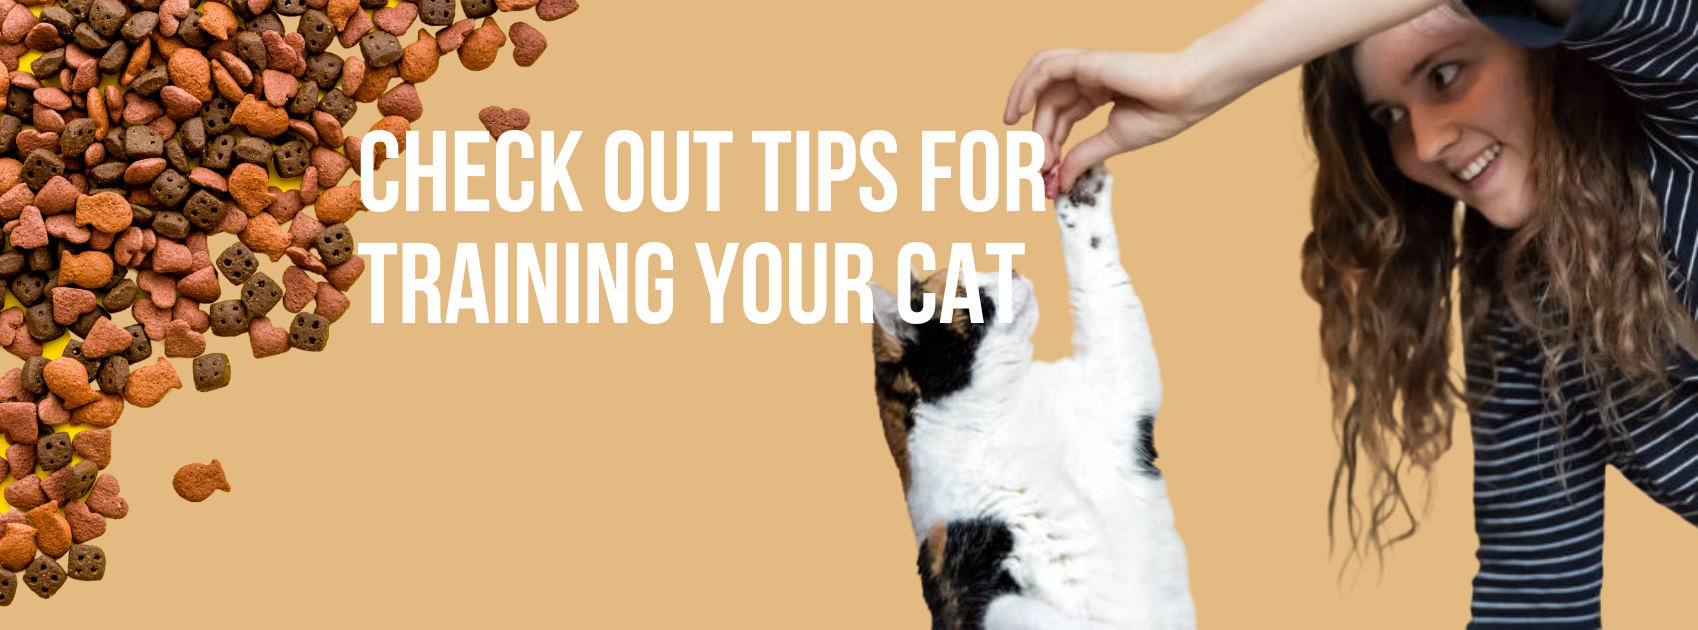 Check Out Tips For Training Your Cat